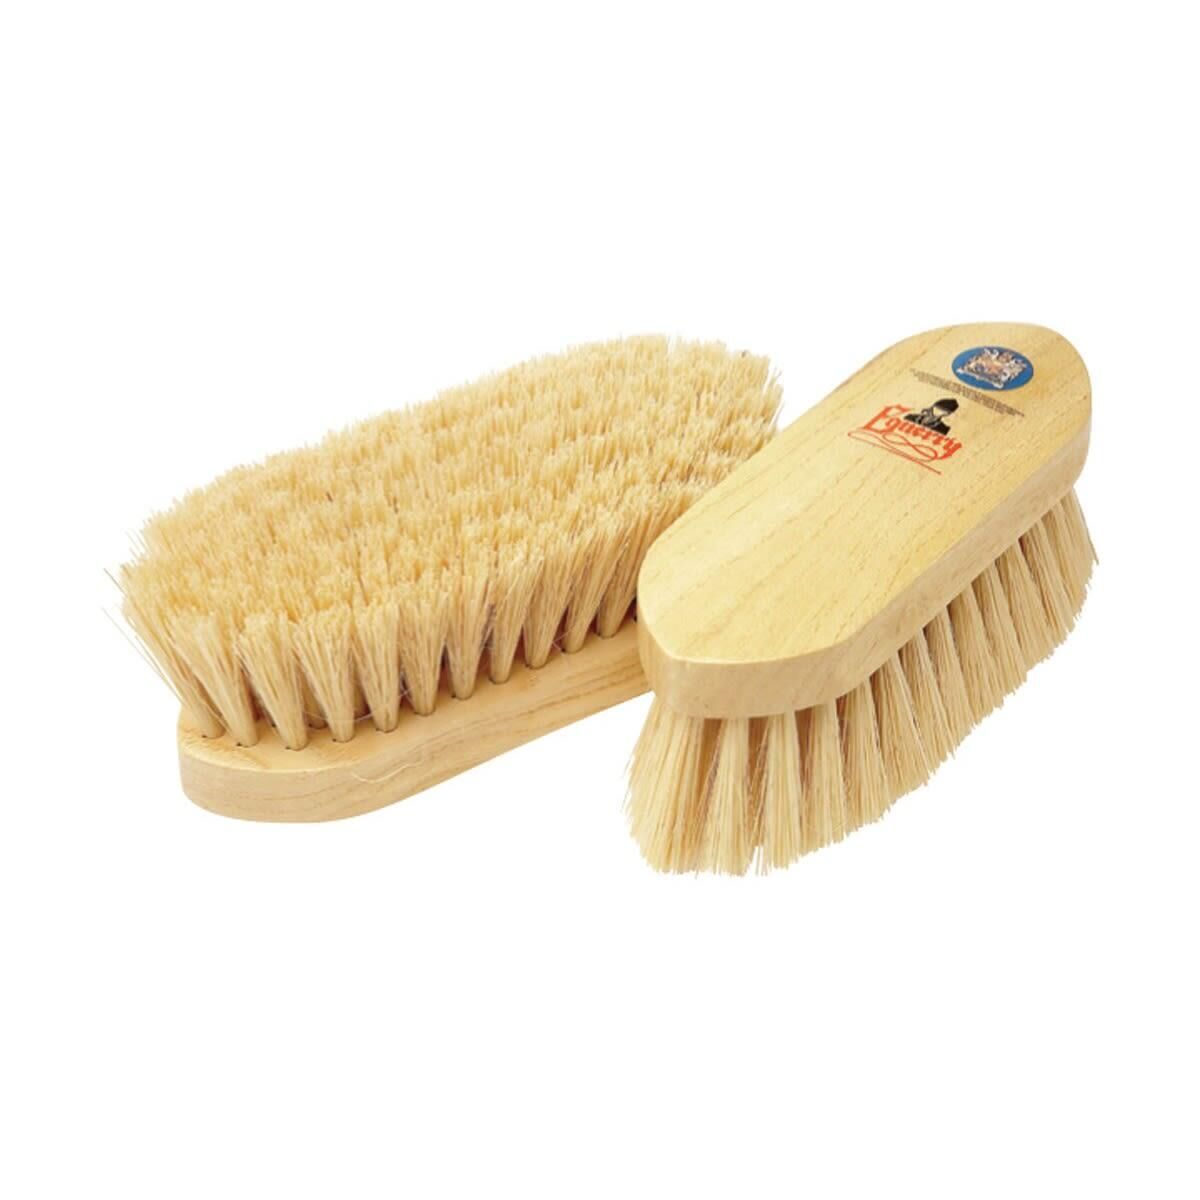 VALE BROTHERS Equerry Wooden Mexican Fibre Dandy Brush (Natural)